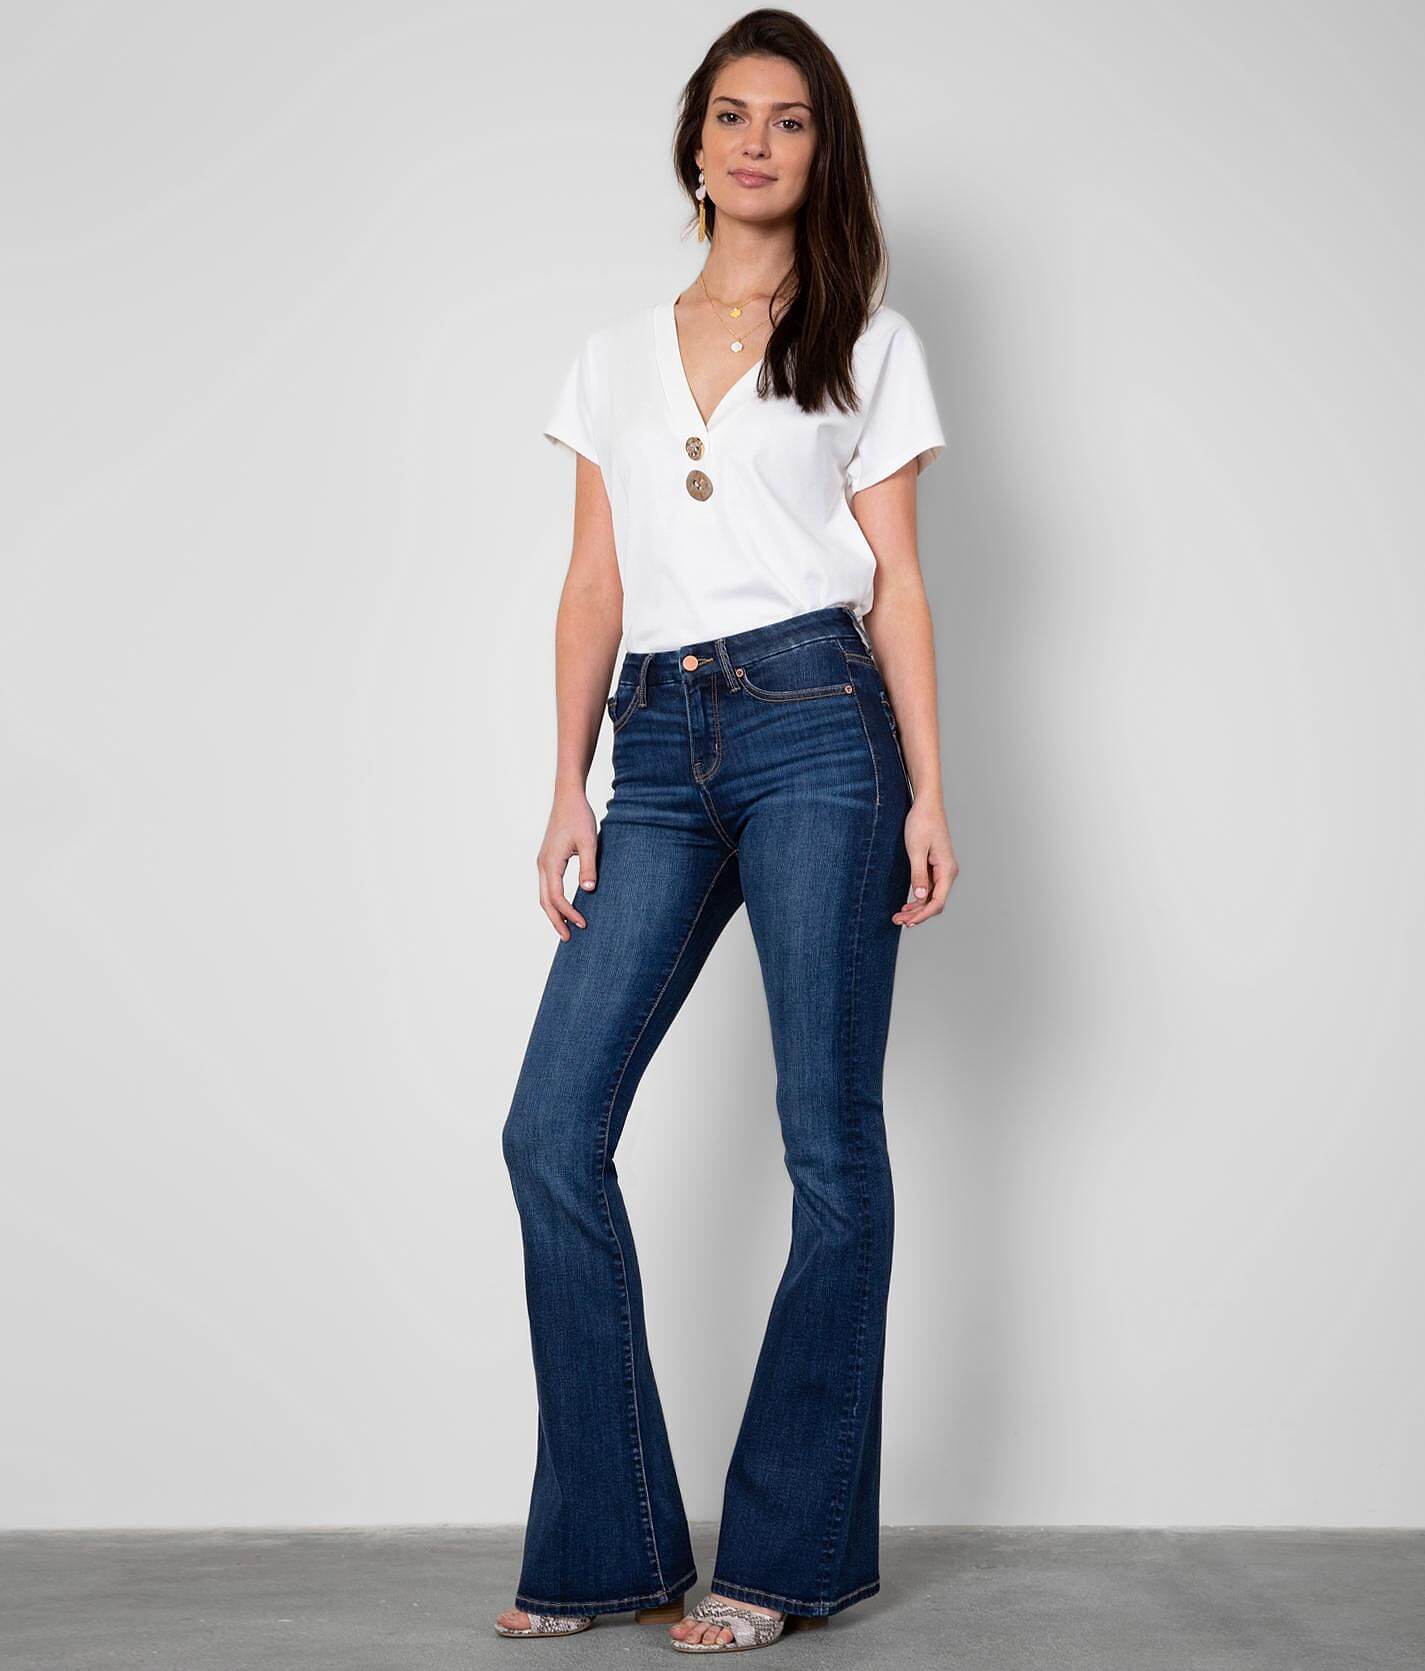 redone jeans canada